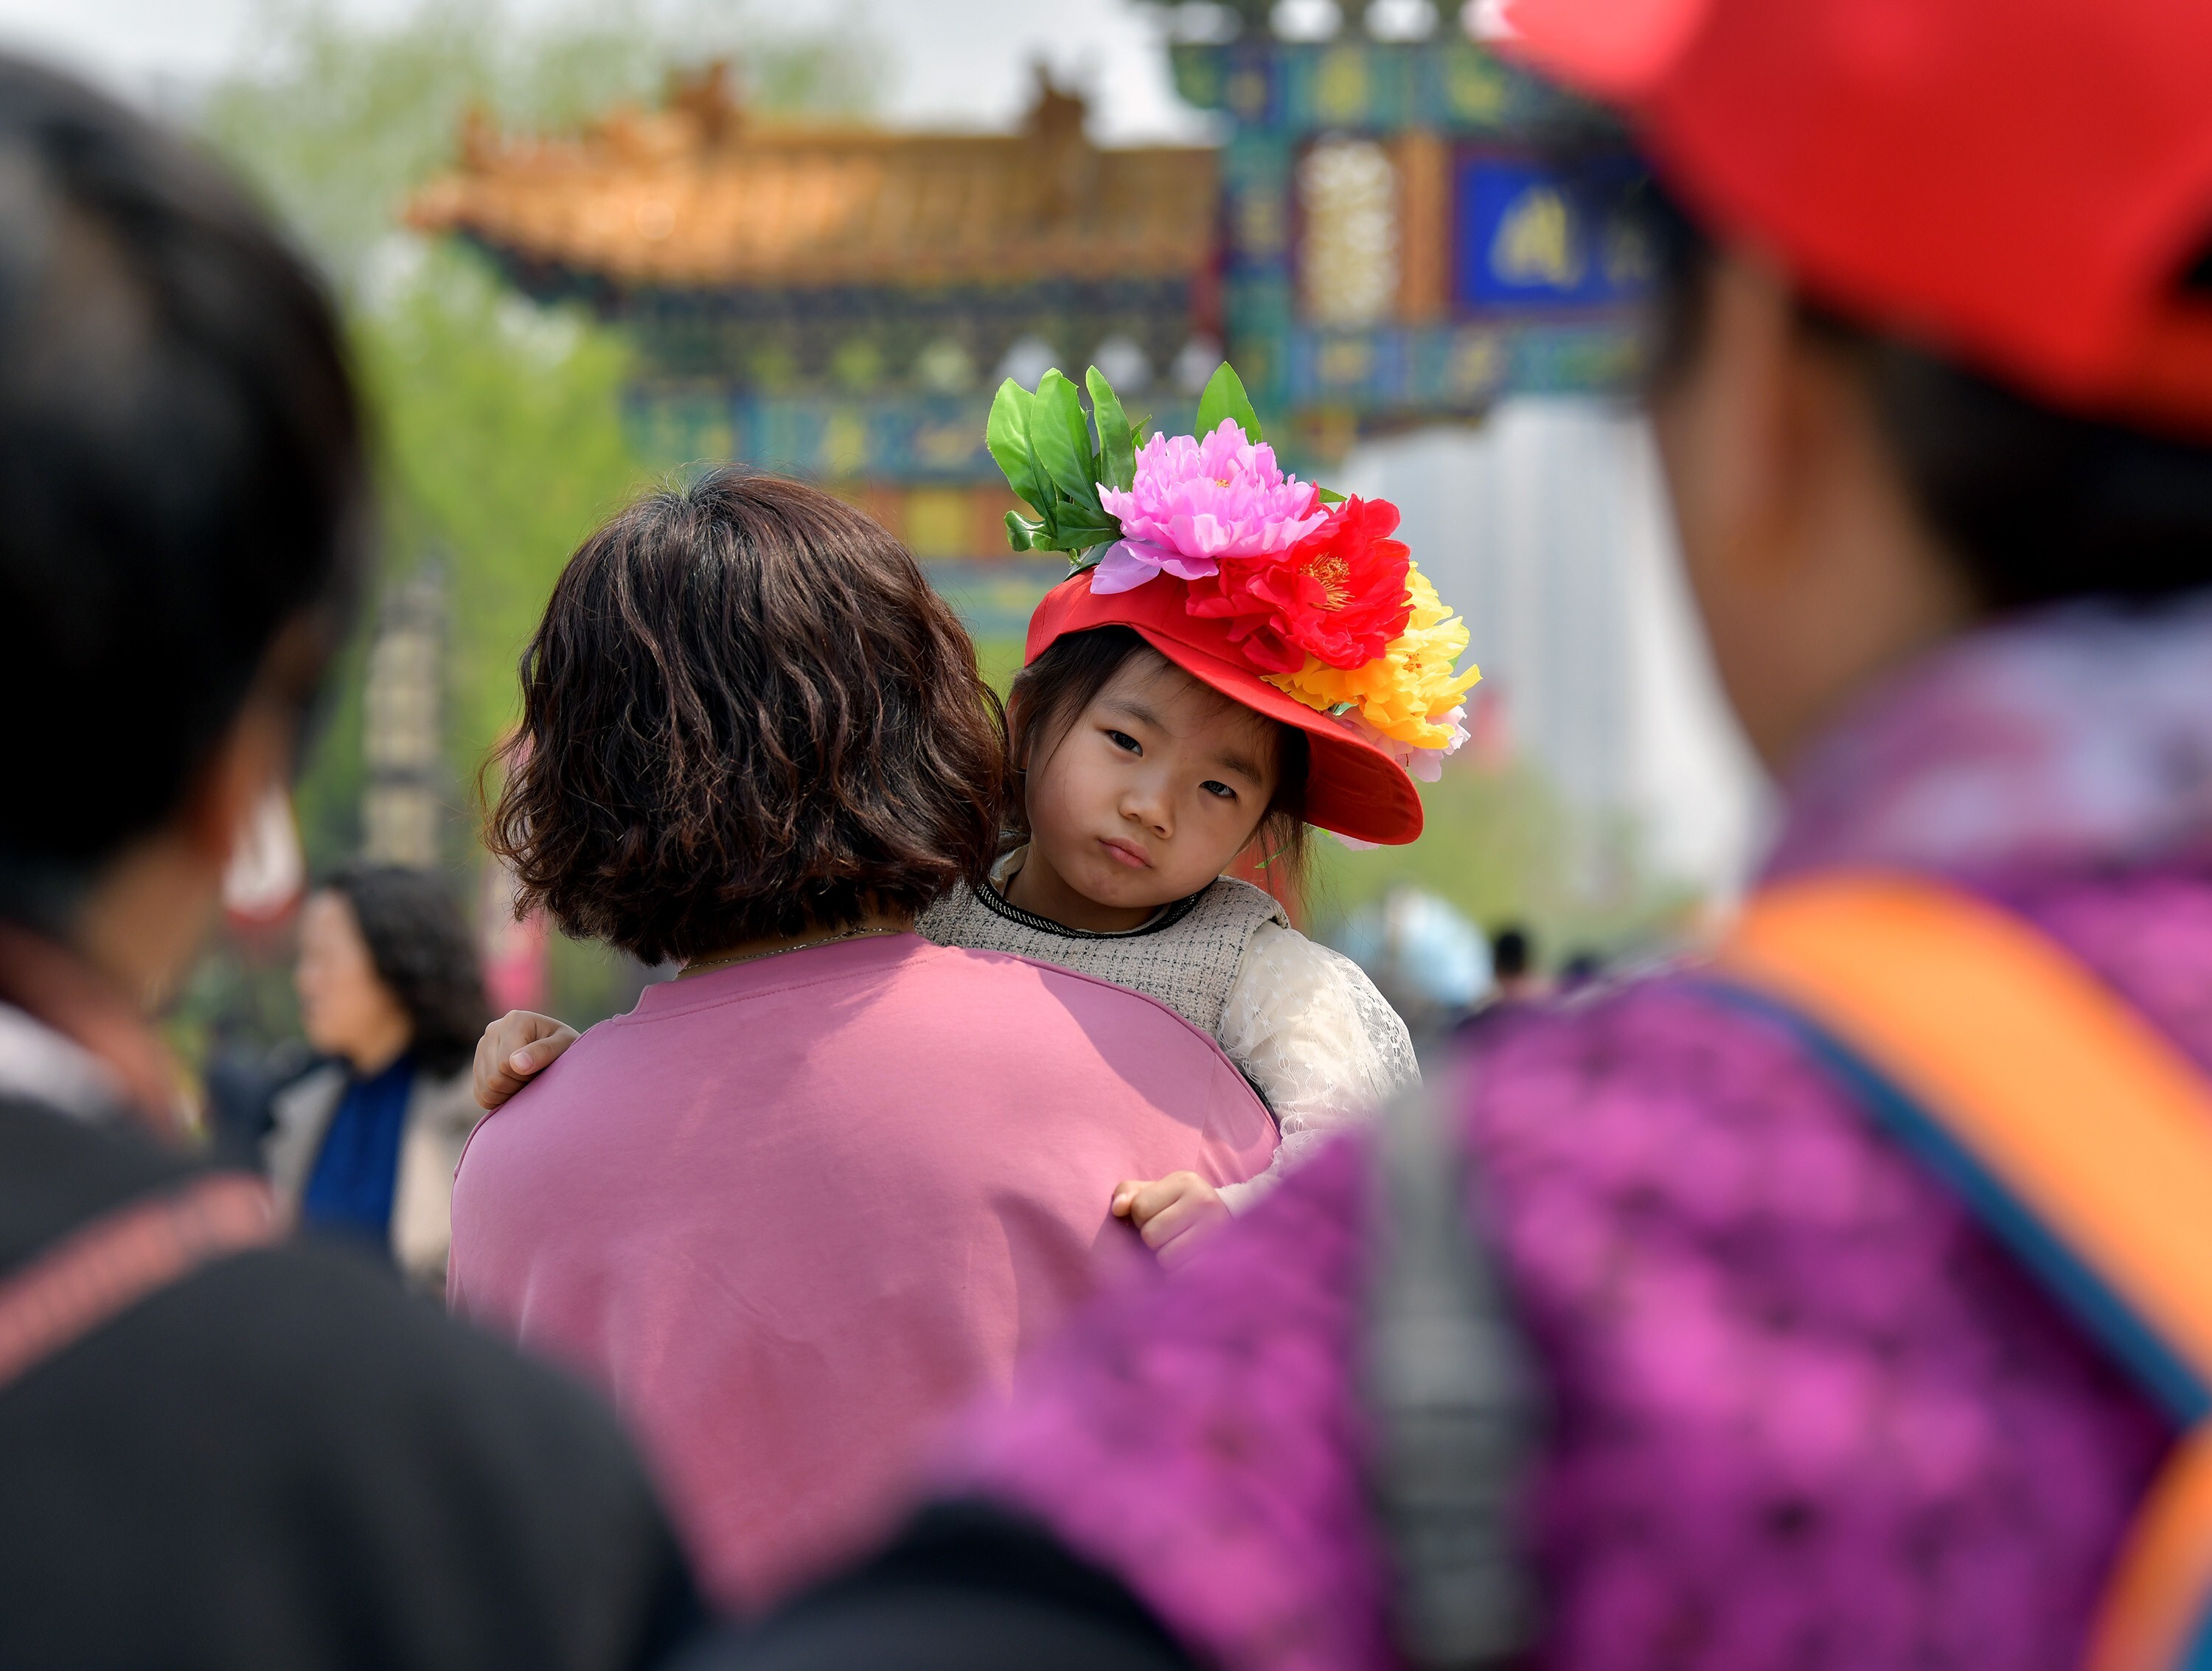 A woman carries a girl as they visit a peony garden in Heze, in east China’s Shandong province, on April 8. In 2020, the country saw only 12 million births, the lowest number in at least six decades. Photo: Xinhua